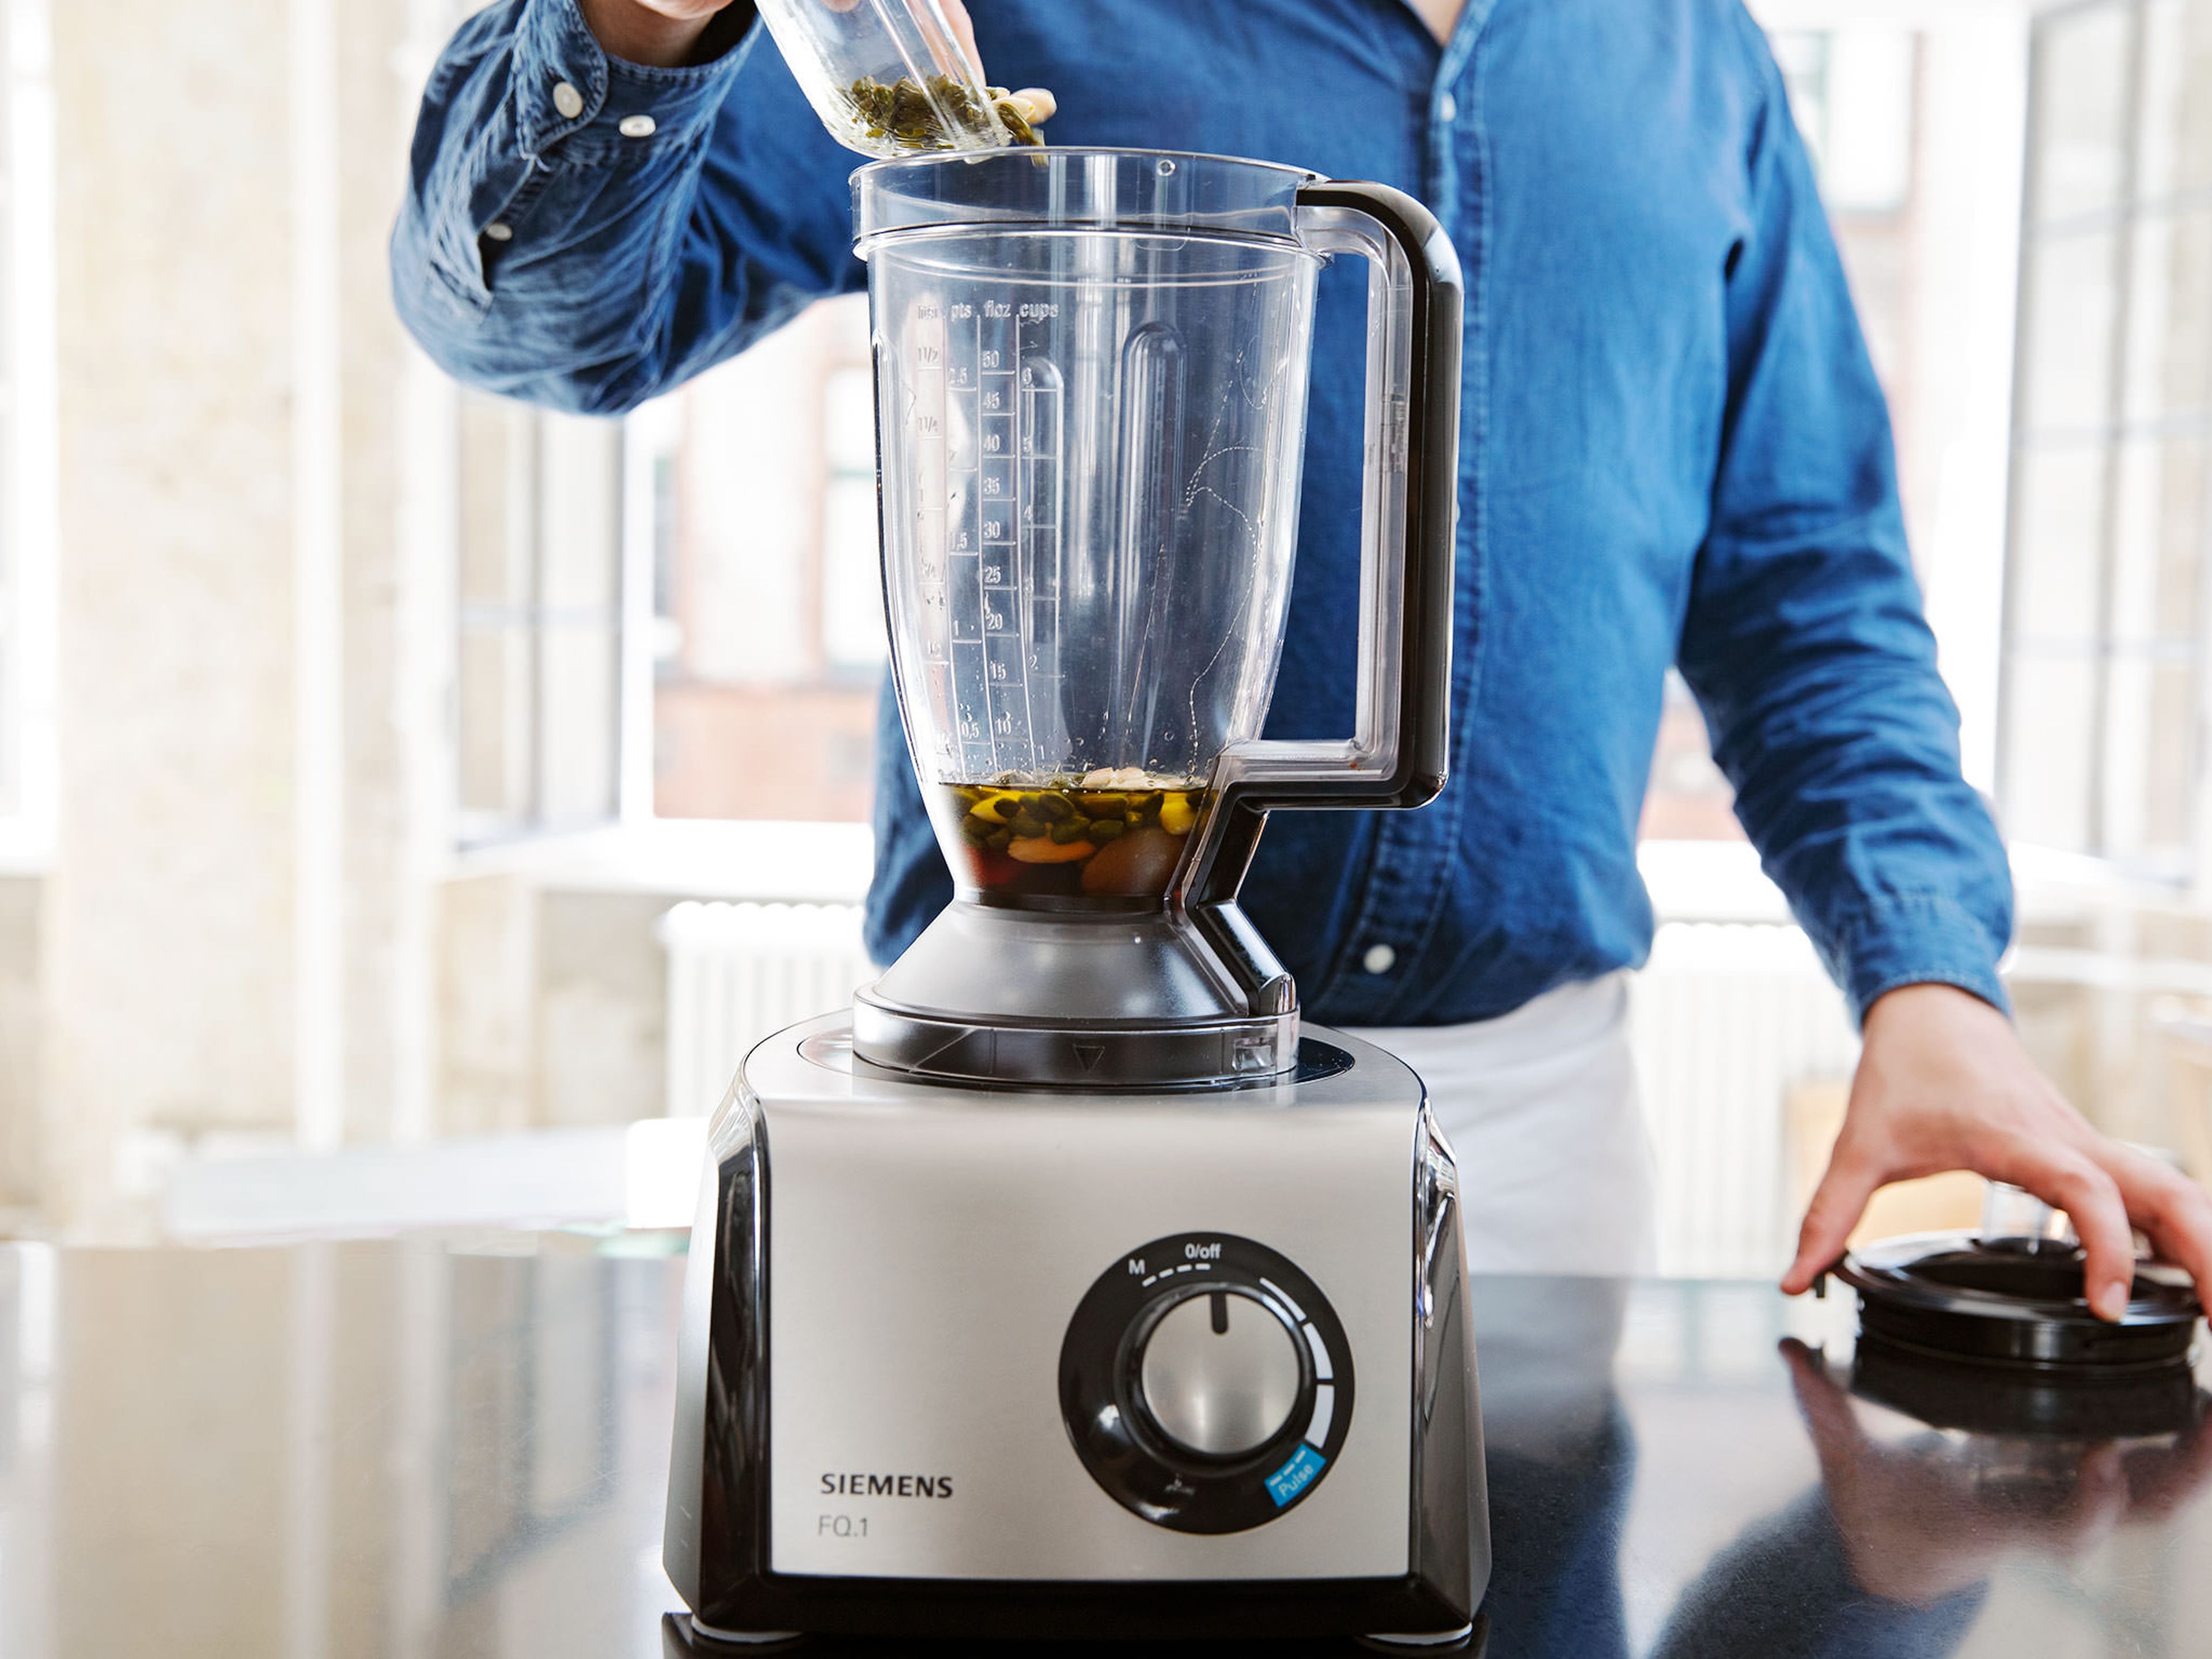 In a food processor, process the toasted nuts together with some more olive oil, dried apricots, amaretto, and half of the honey, until nuts are ground and mixture forms a coarse paste.